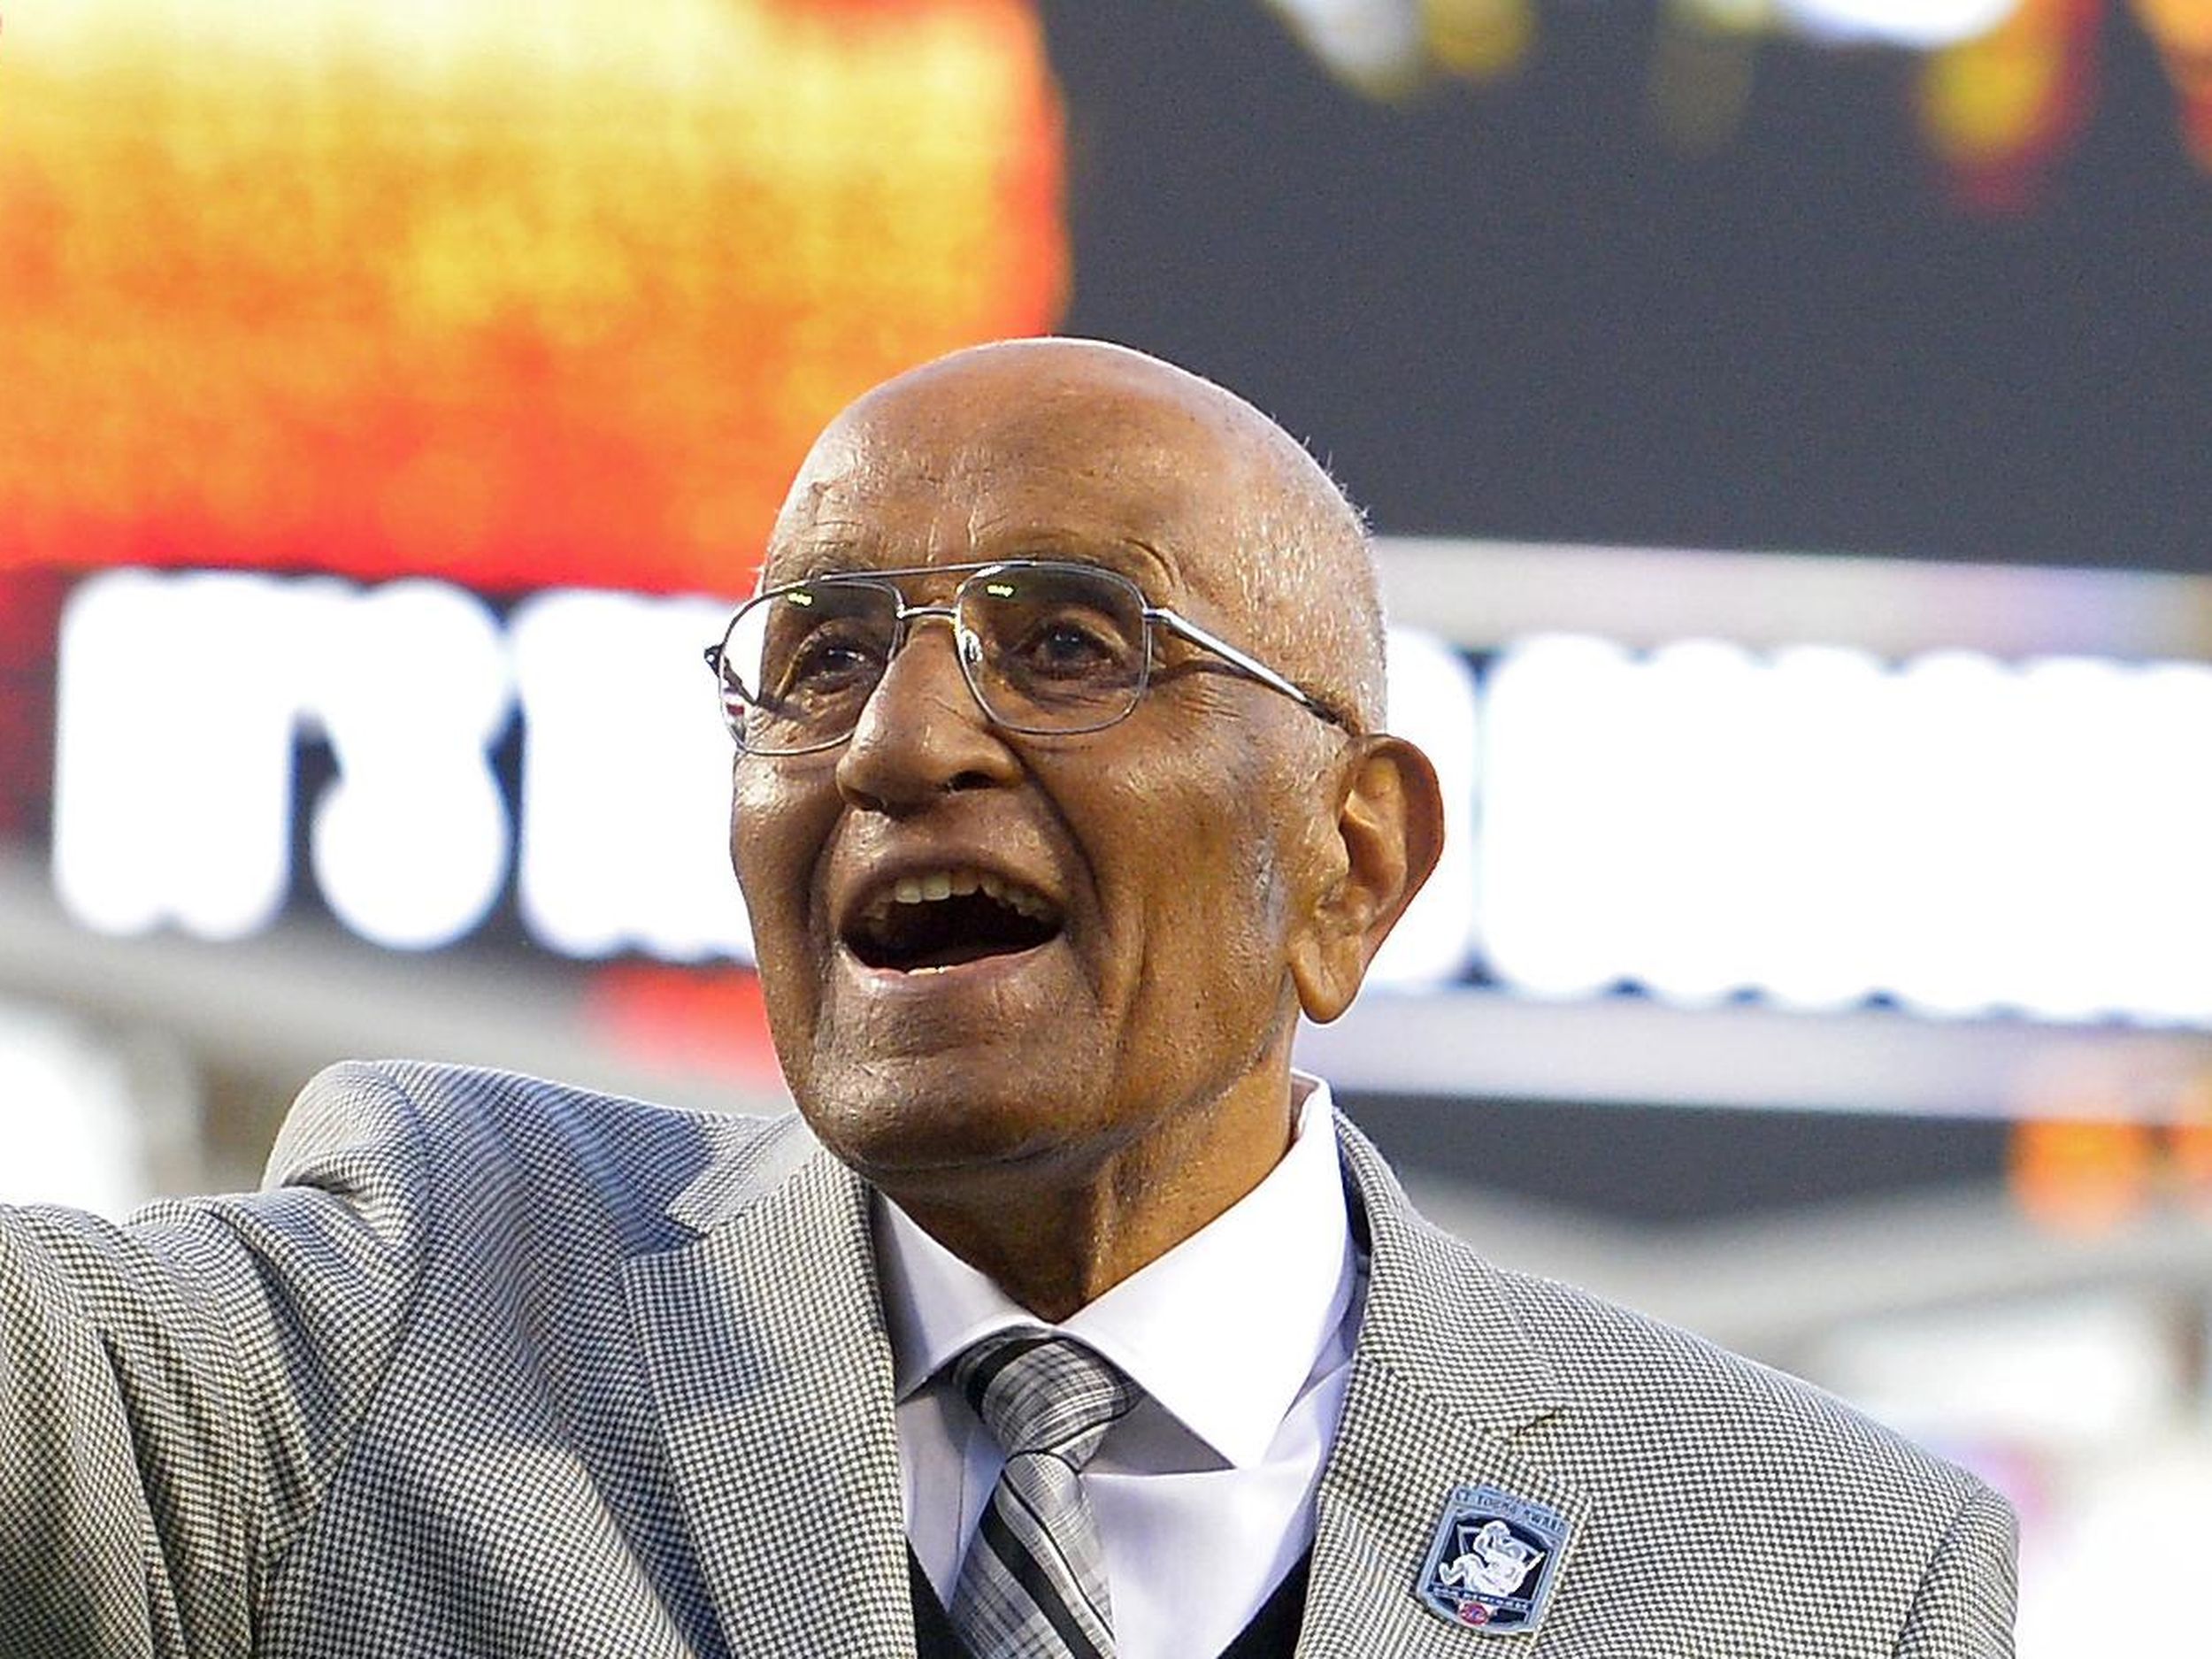 Don Newcombe, one of the greatest pitchers in Dodger history, dead at age 92